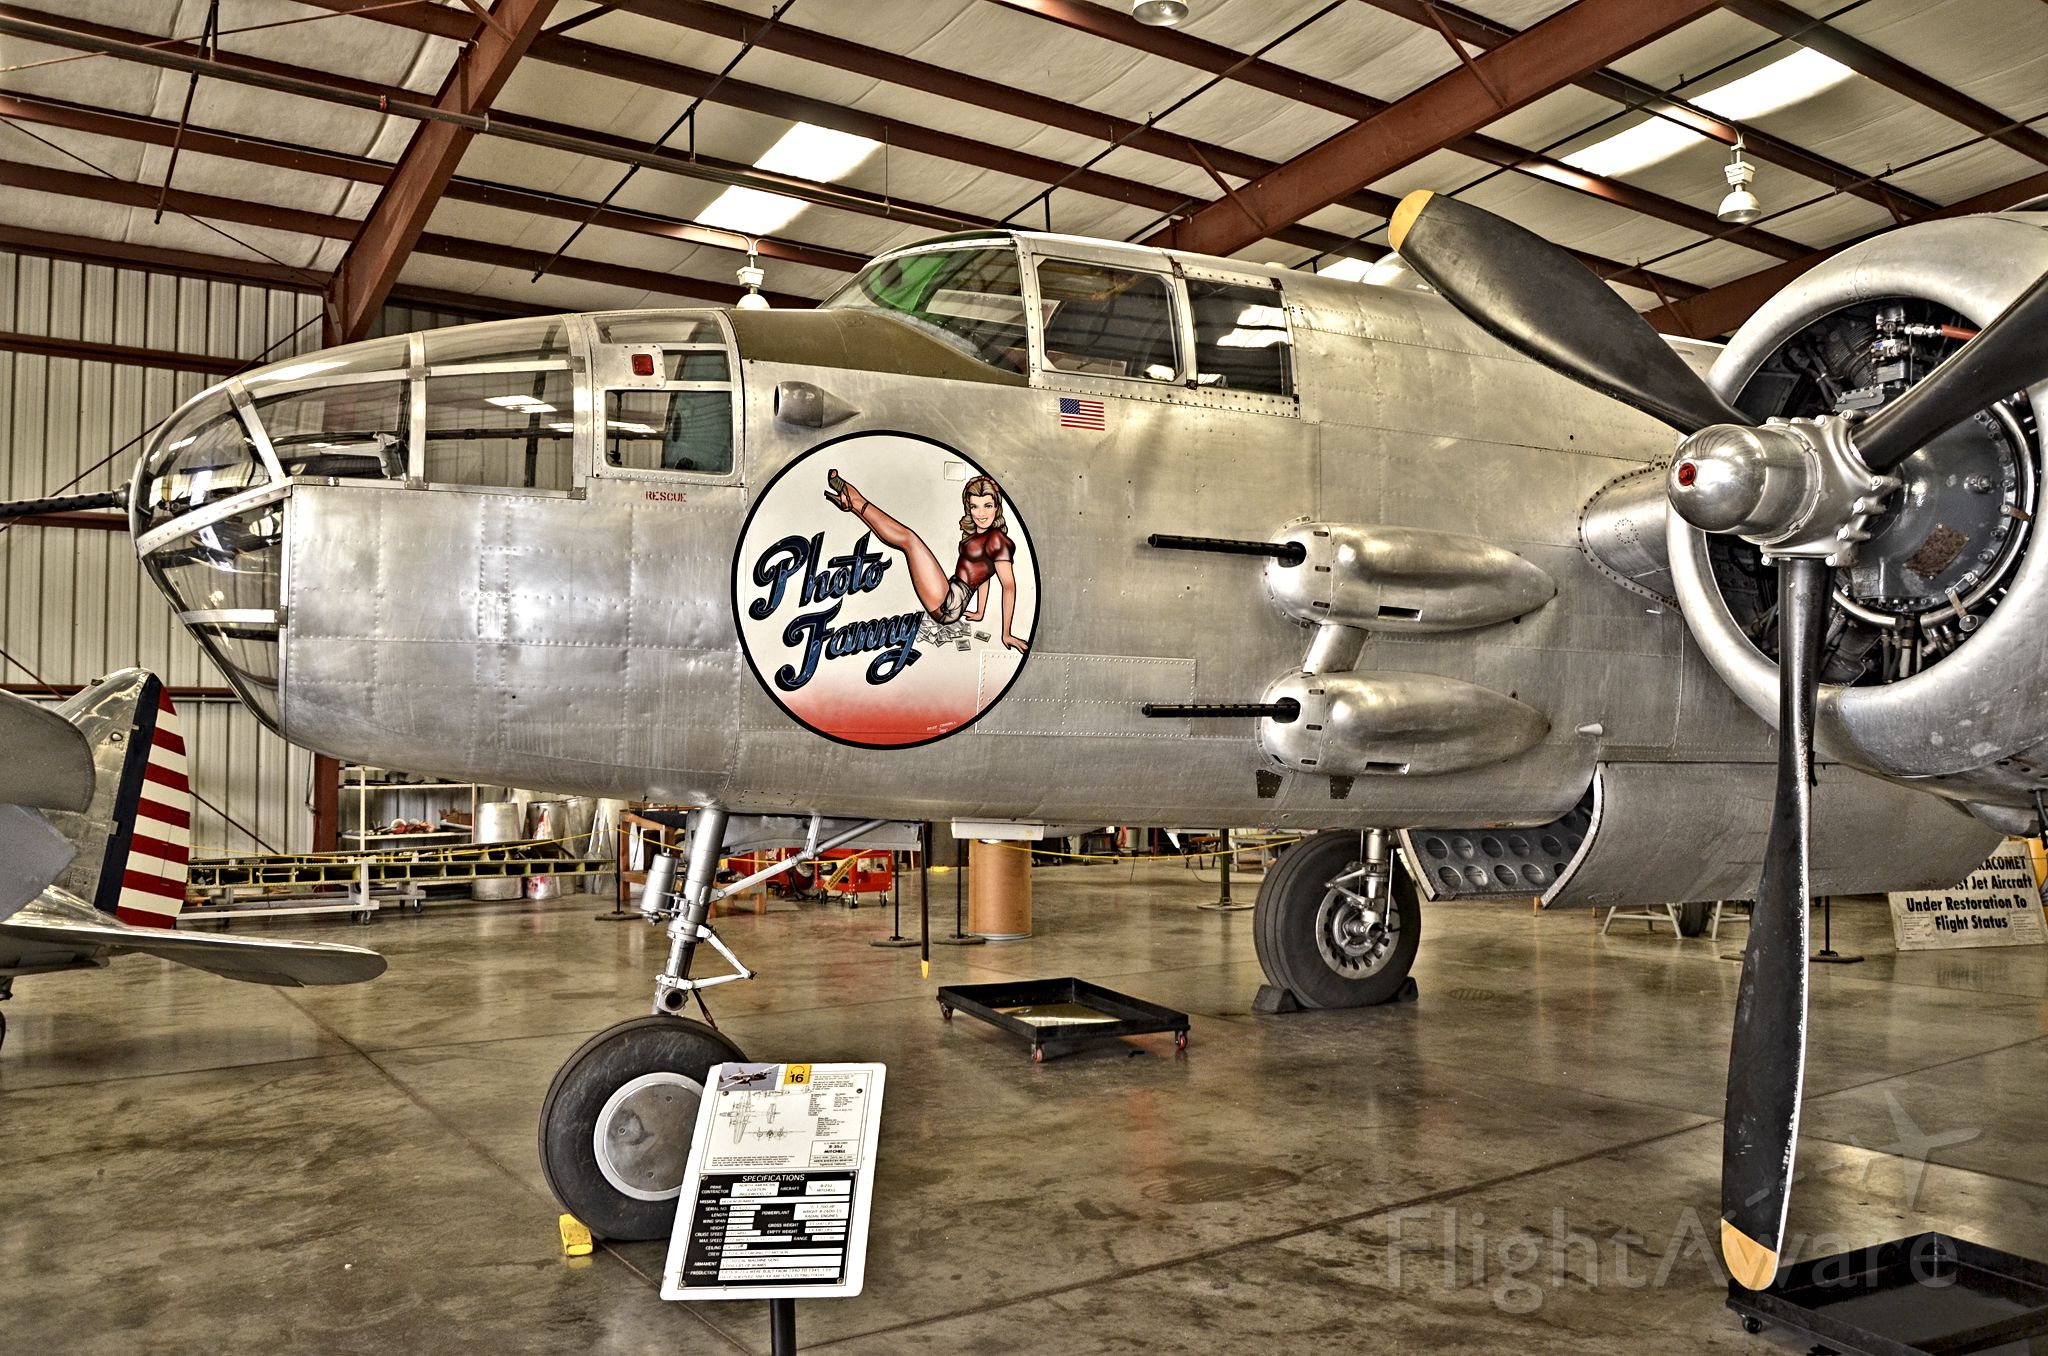 N3675G — - N3675G 1944 North American B-25J Mitchell S/N 43-4030 "Photo Fanny"  Planes of Fame Air Museum TDelCoro October 21, 2012